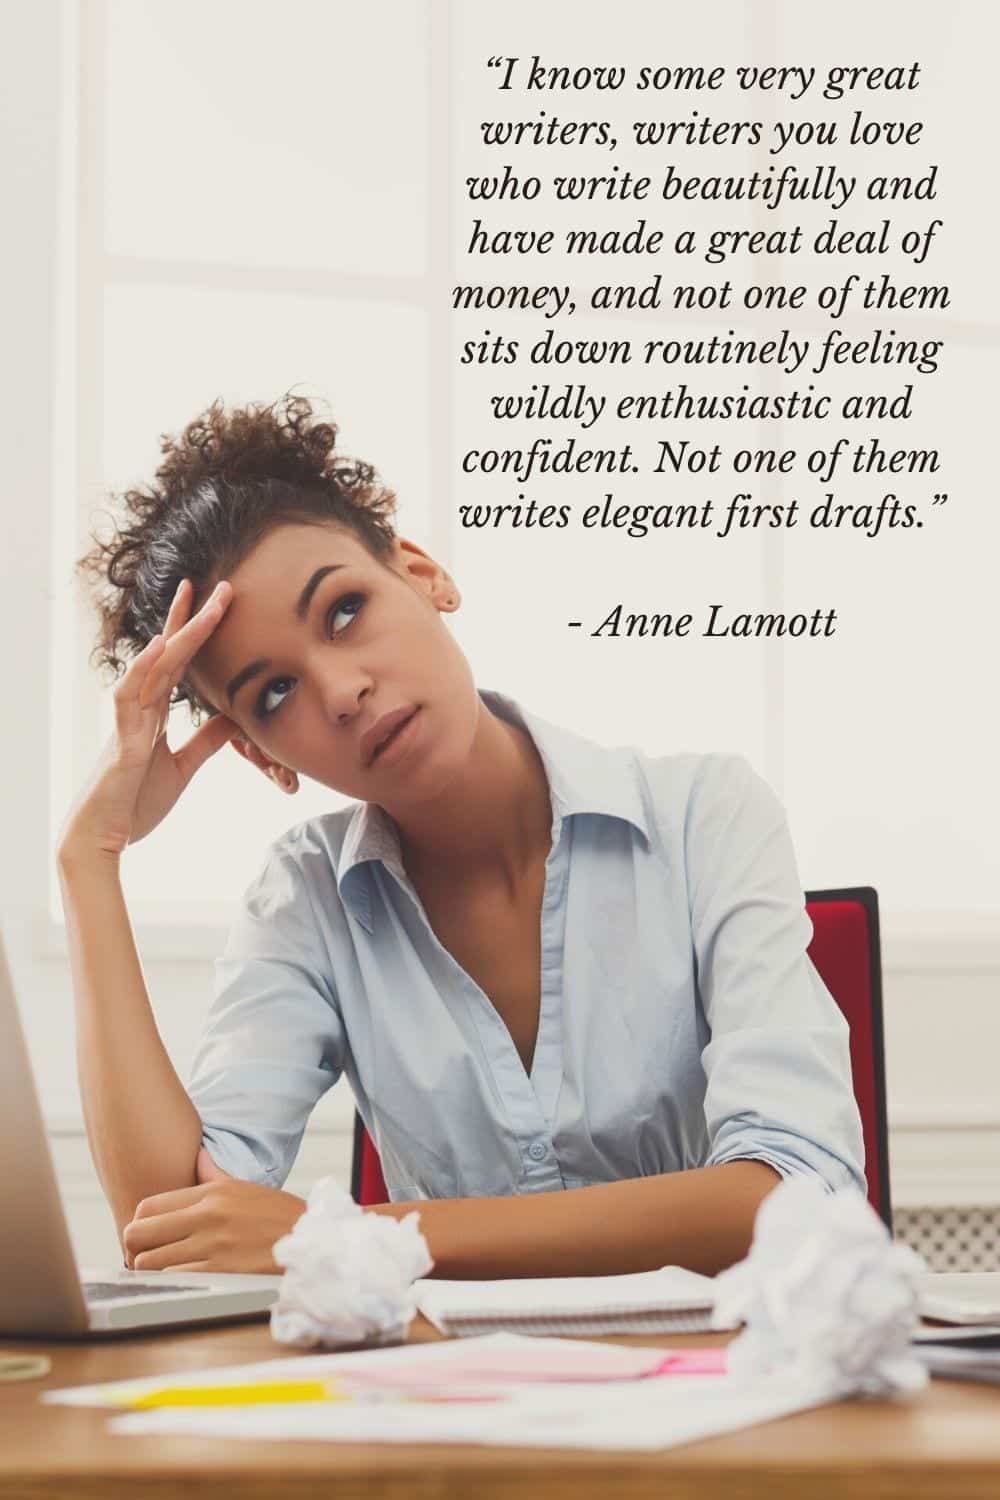 Anne Lamott quotes on writing